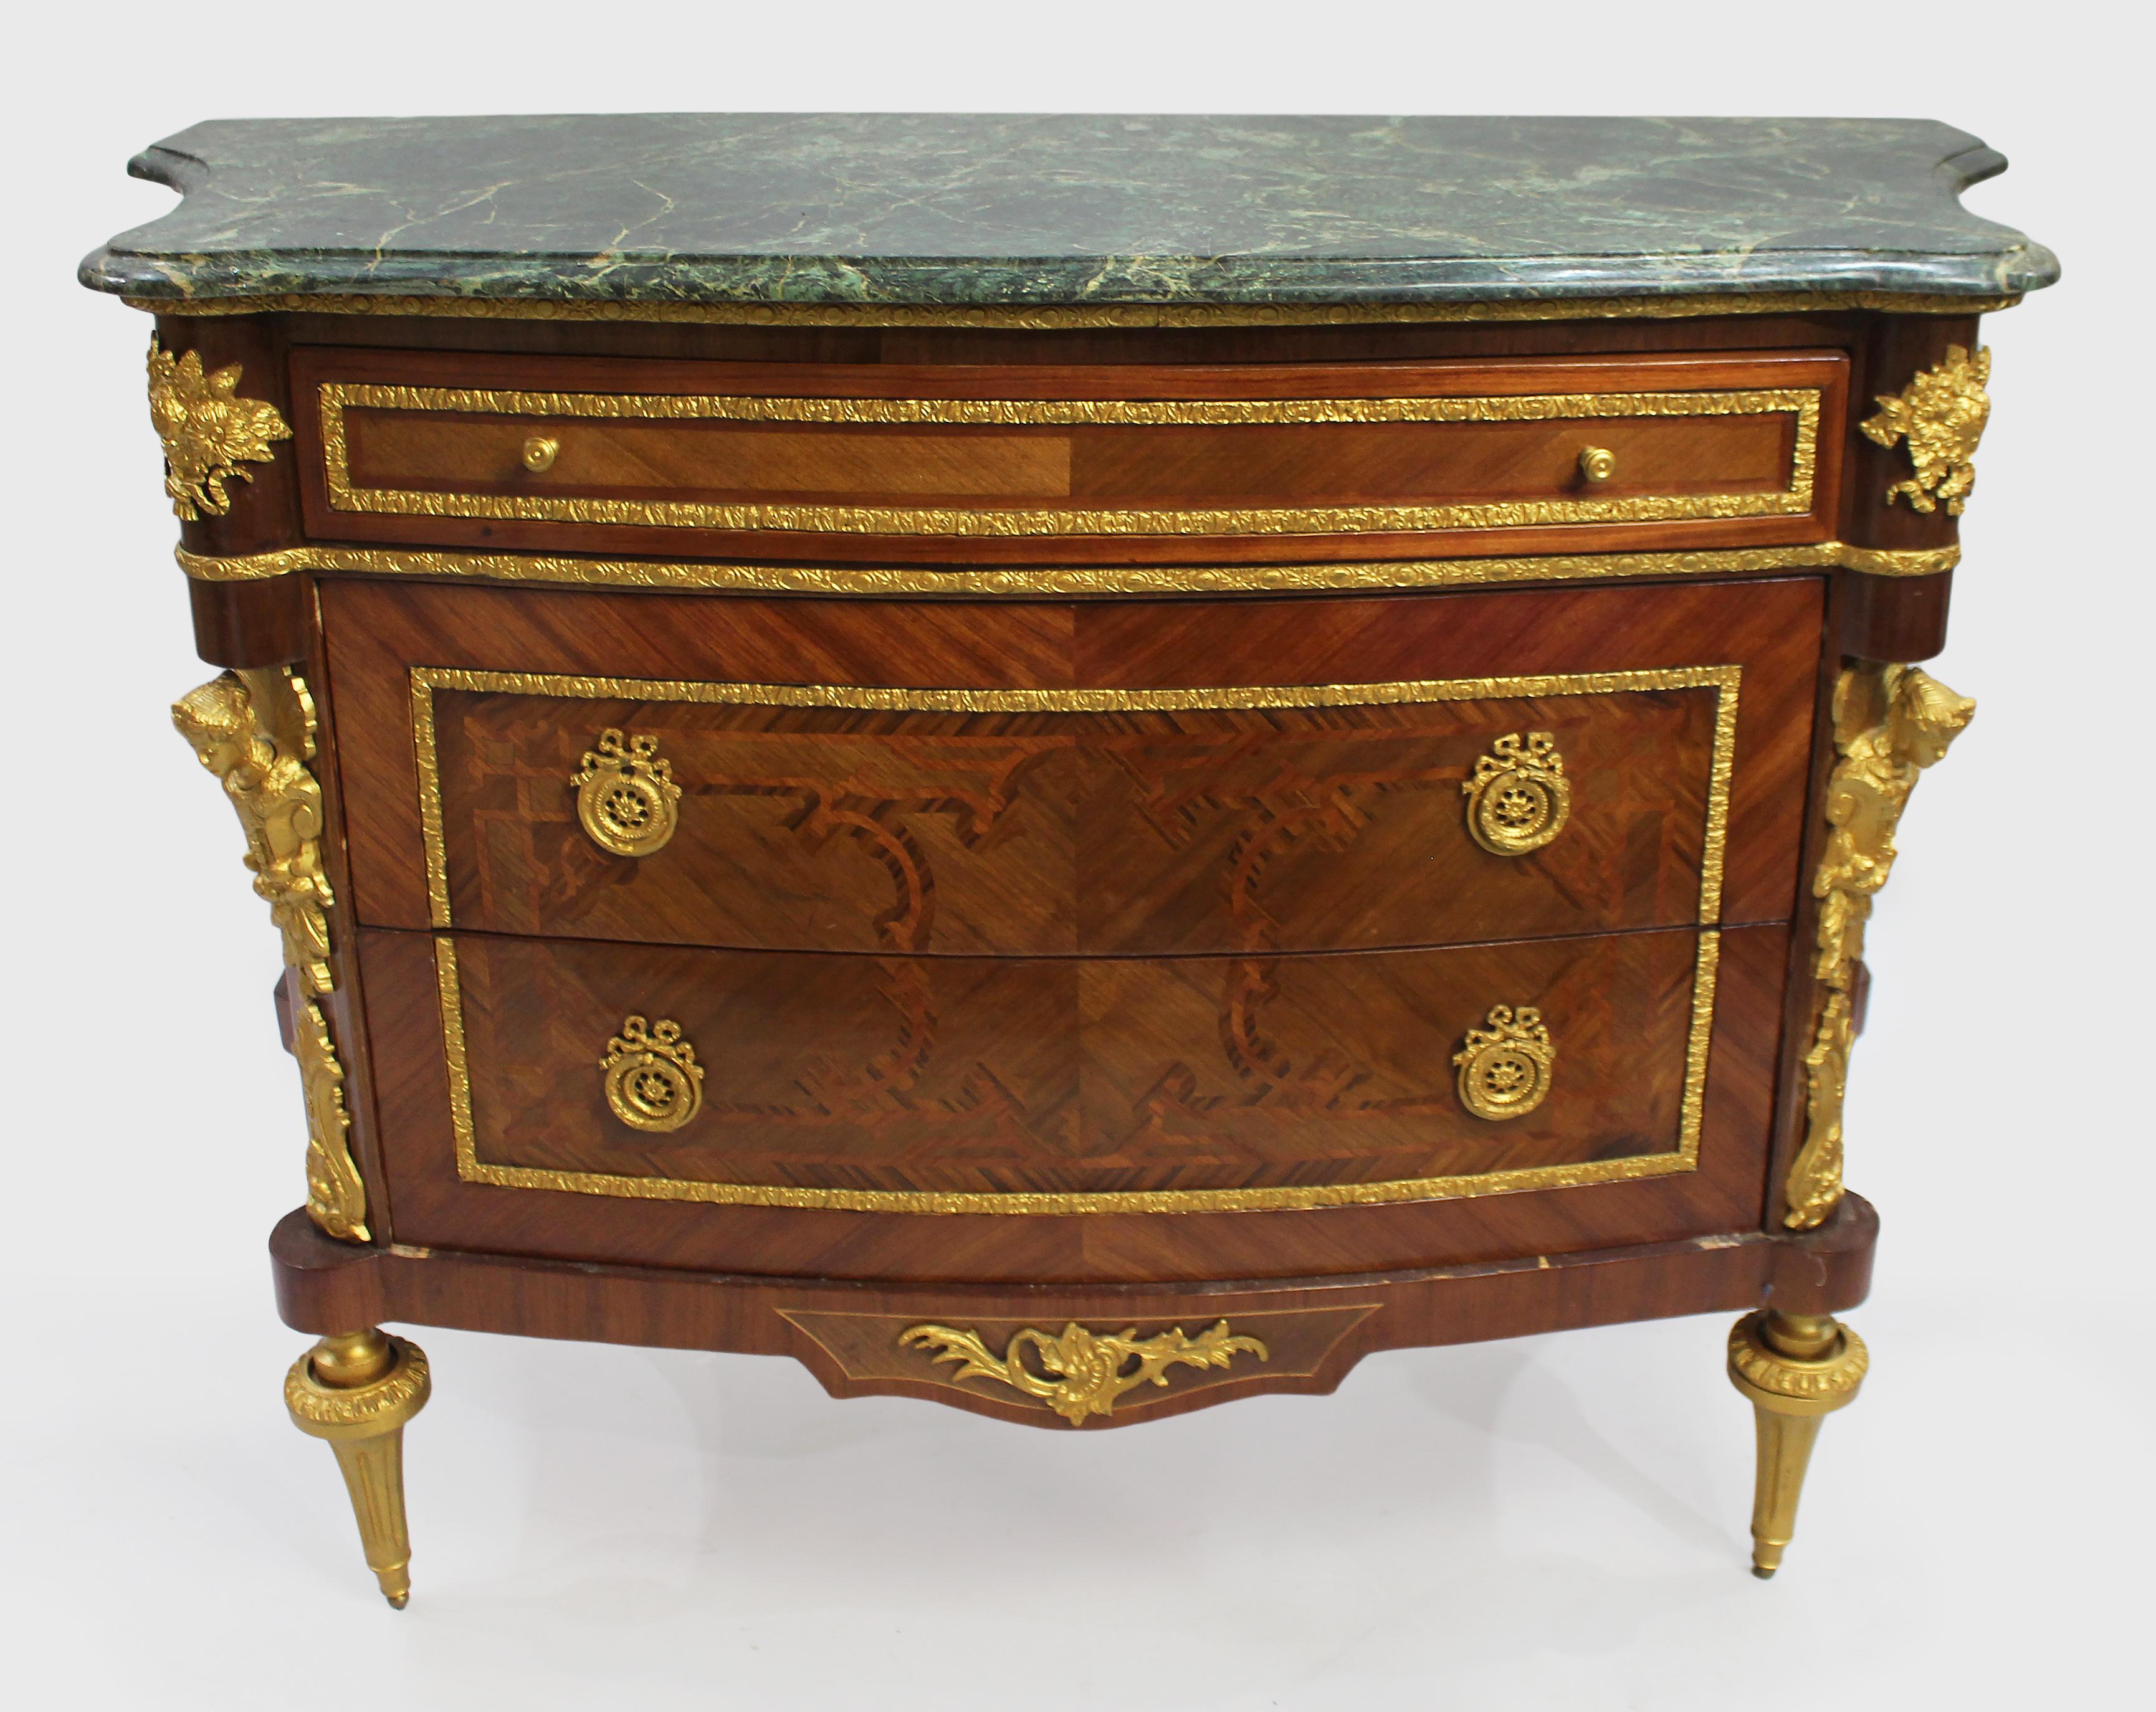 French marble topped bow fronted commode with gilt metal mounts


Late twentieth century in an eighteenth century French manner

Heavy green veined shaped marble top.

Bow fronted from with three drawers to the body. Inlaid to the whole.